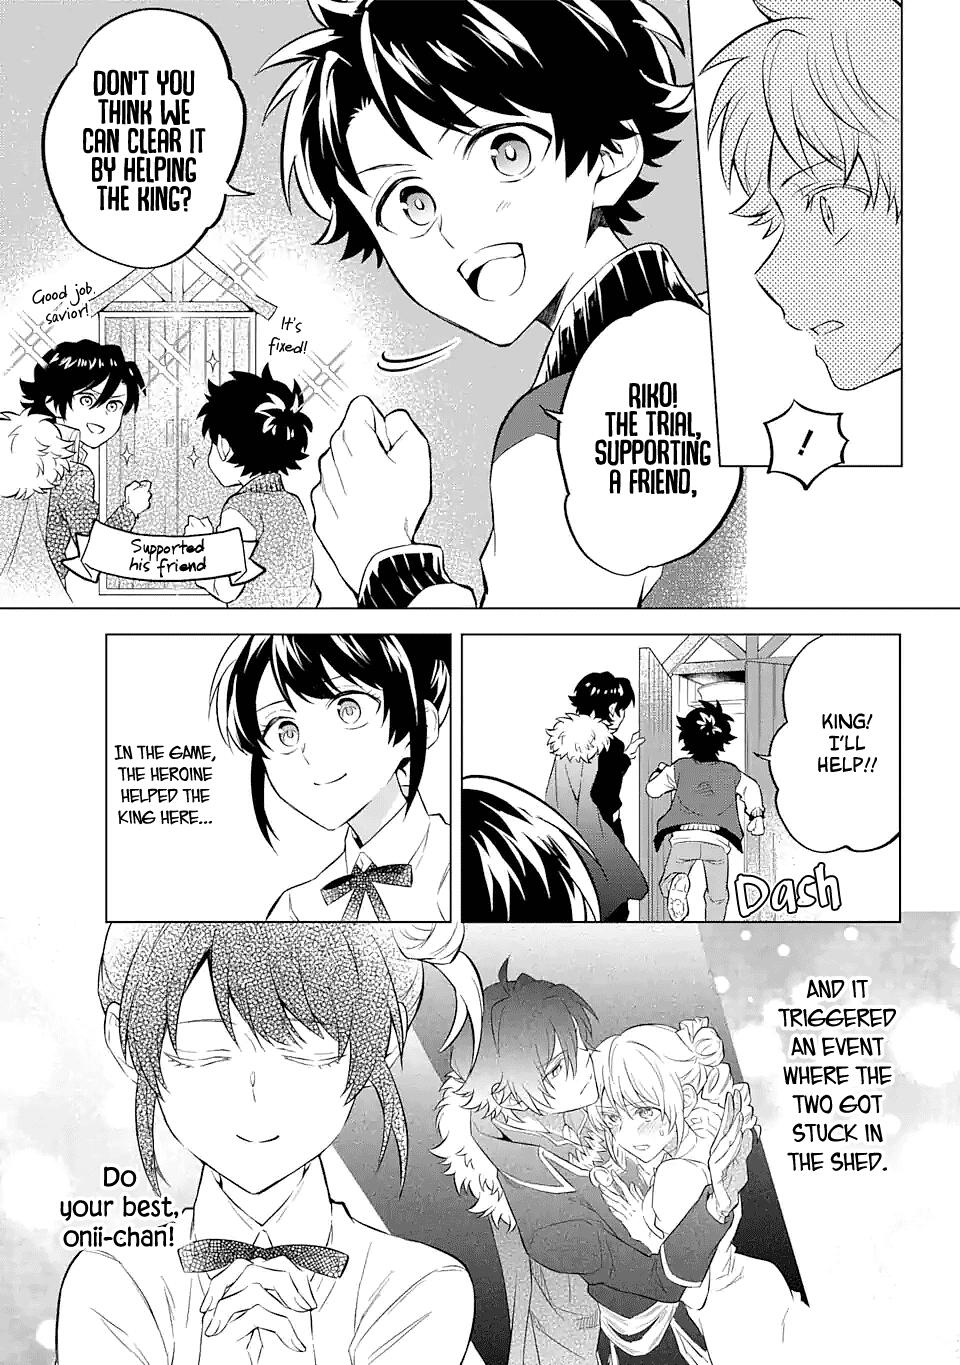 Transferred To Another World, But I'm Saving The World Of An Otome Game!? Chapter 16: The Seven Trials And Me?! page 21 - Mangakakalots.com